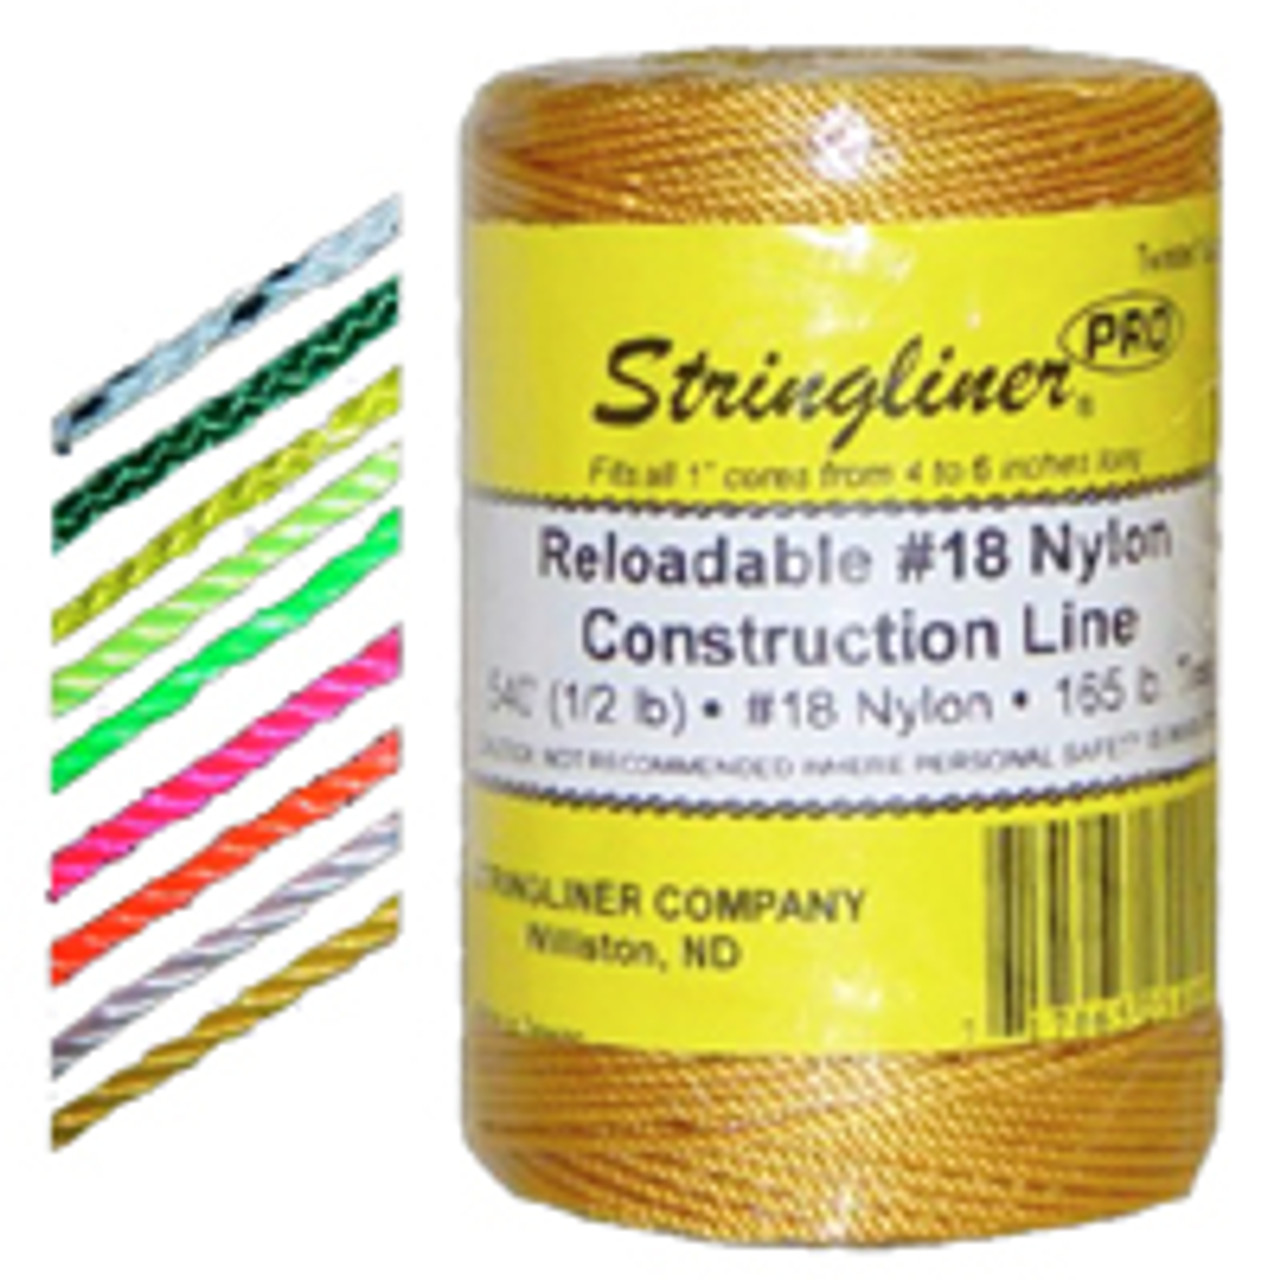 Stringliner Pro Twisted Fluorescent Green 270 ft - 25115